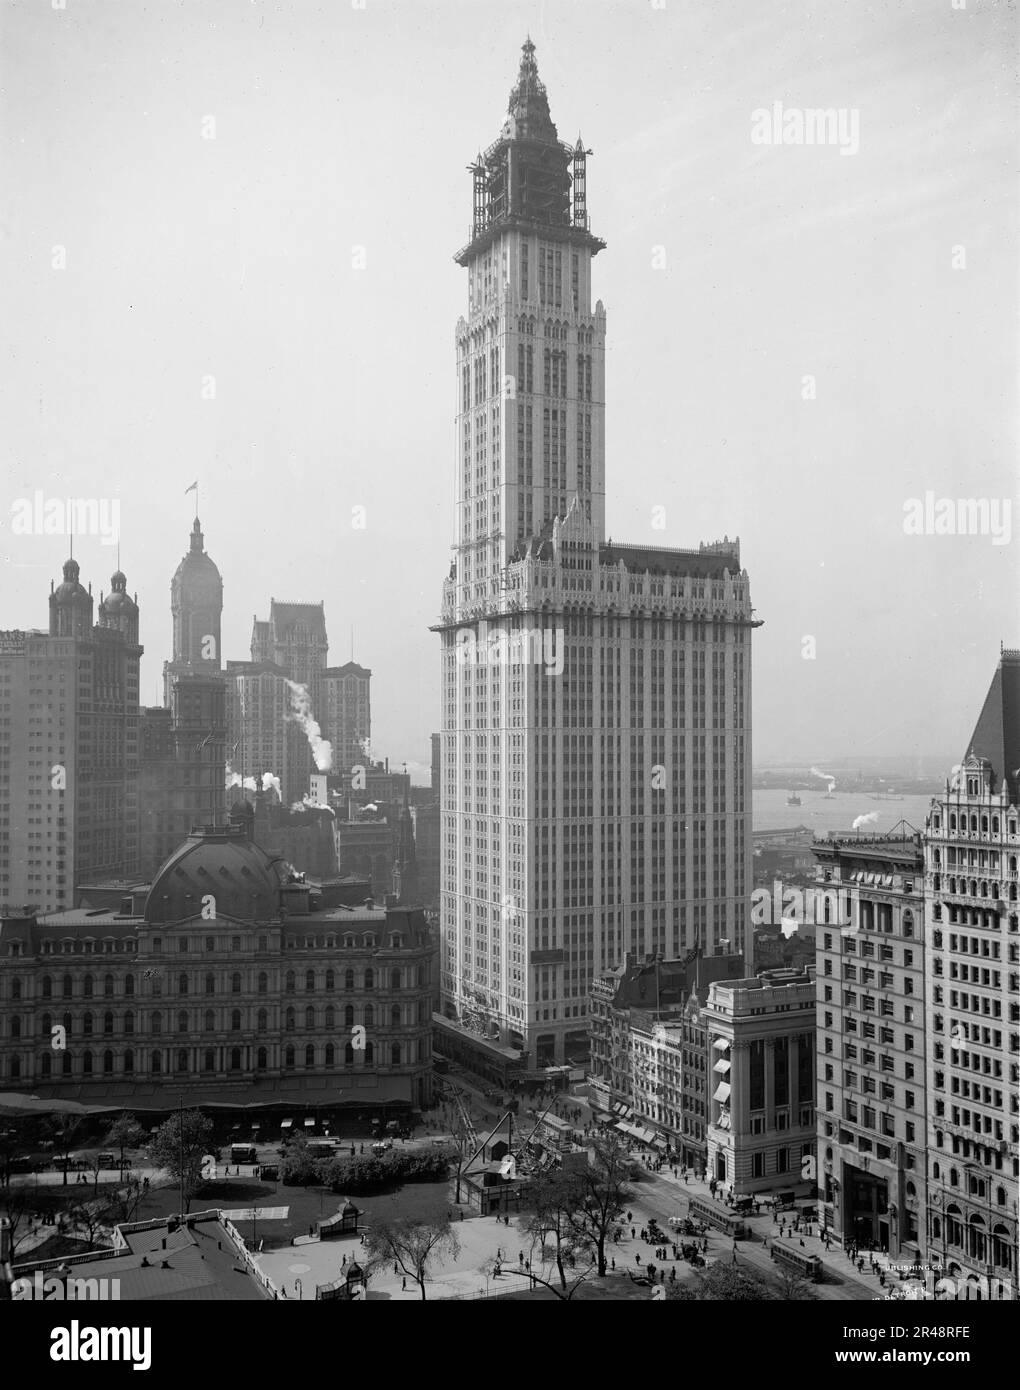 Woolworth Building, New York City, c.between 1910 and 1920. City Hall Park and Post Office at lower left. Stock Photo